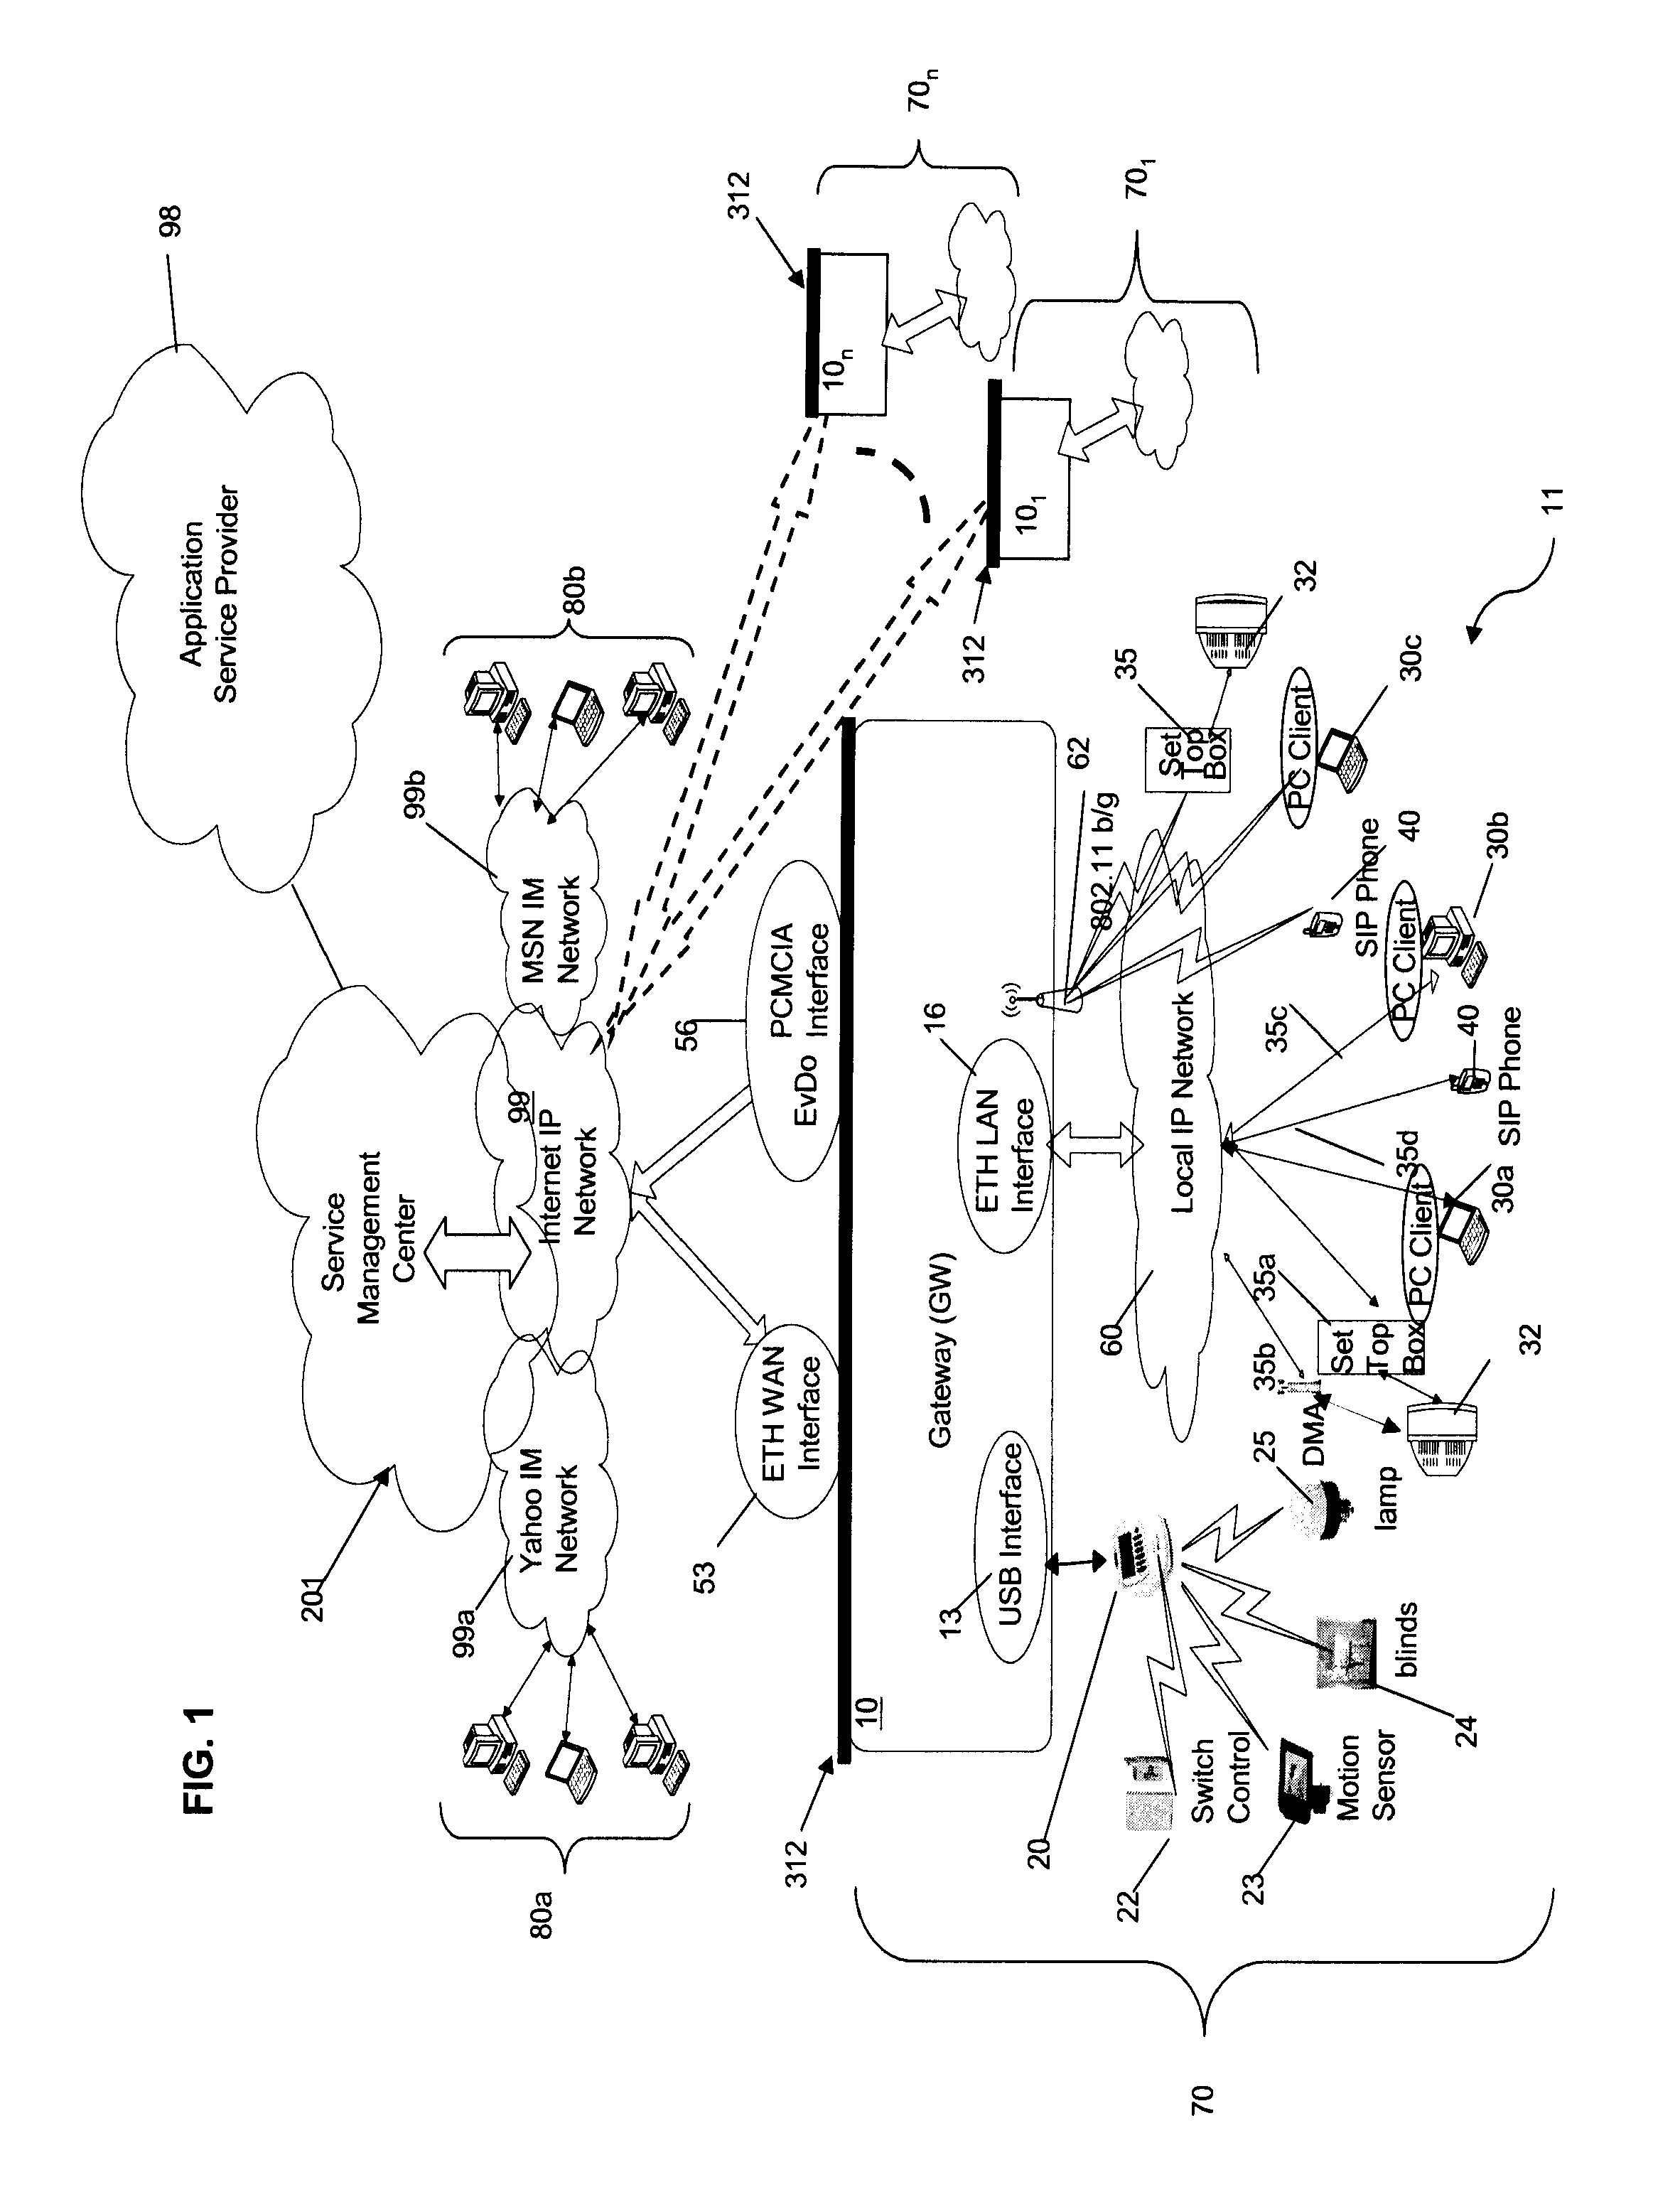 System And Method To Acquire, Aggregate, Manage, And Distribute Media